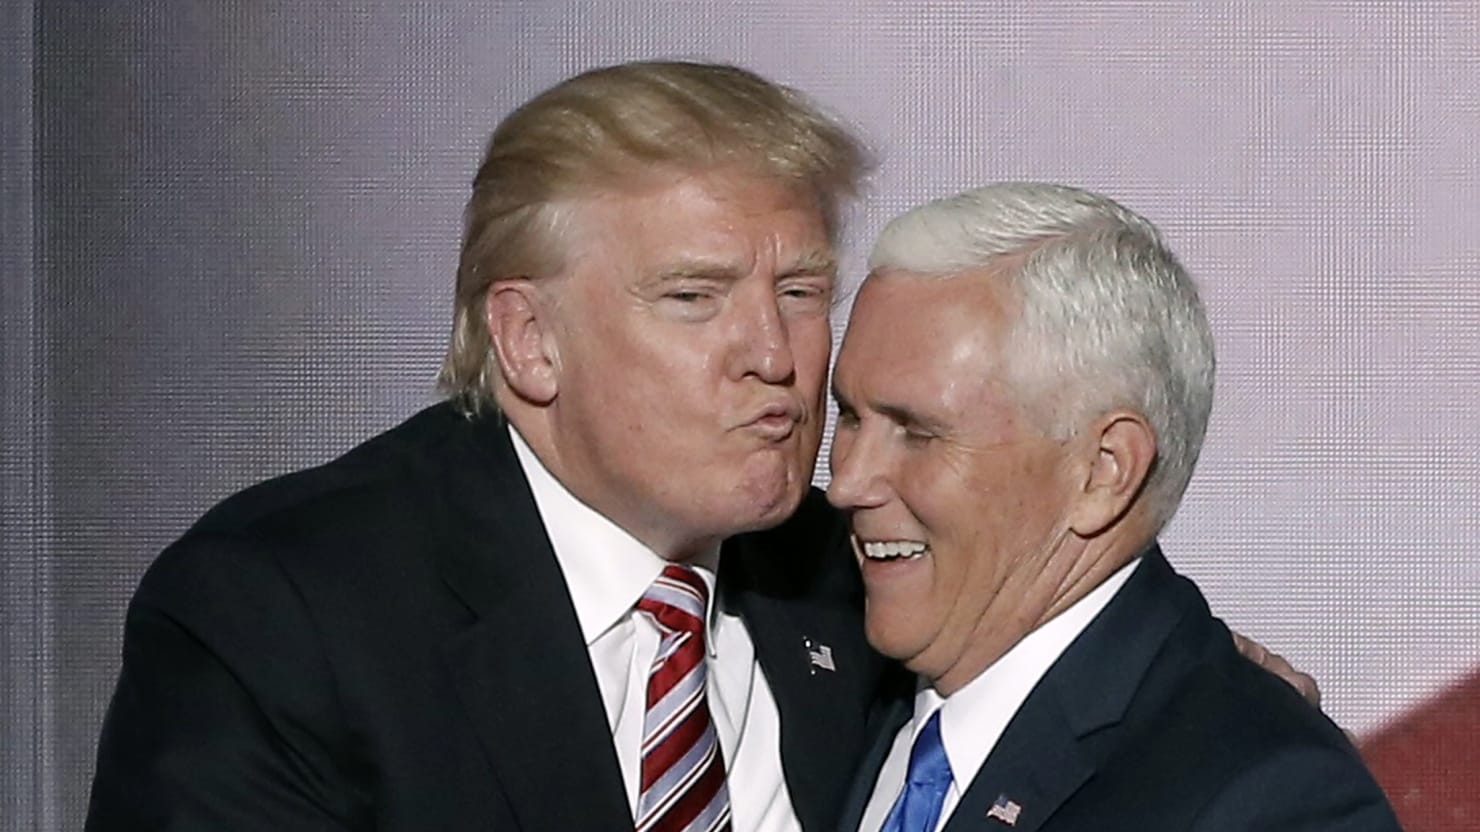 Mike Pence Putting Ambition Before Belief Assumes His Position Beside Trump